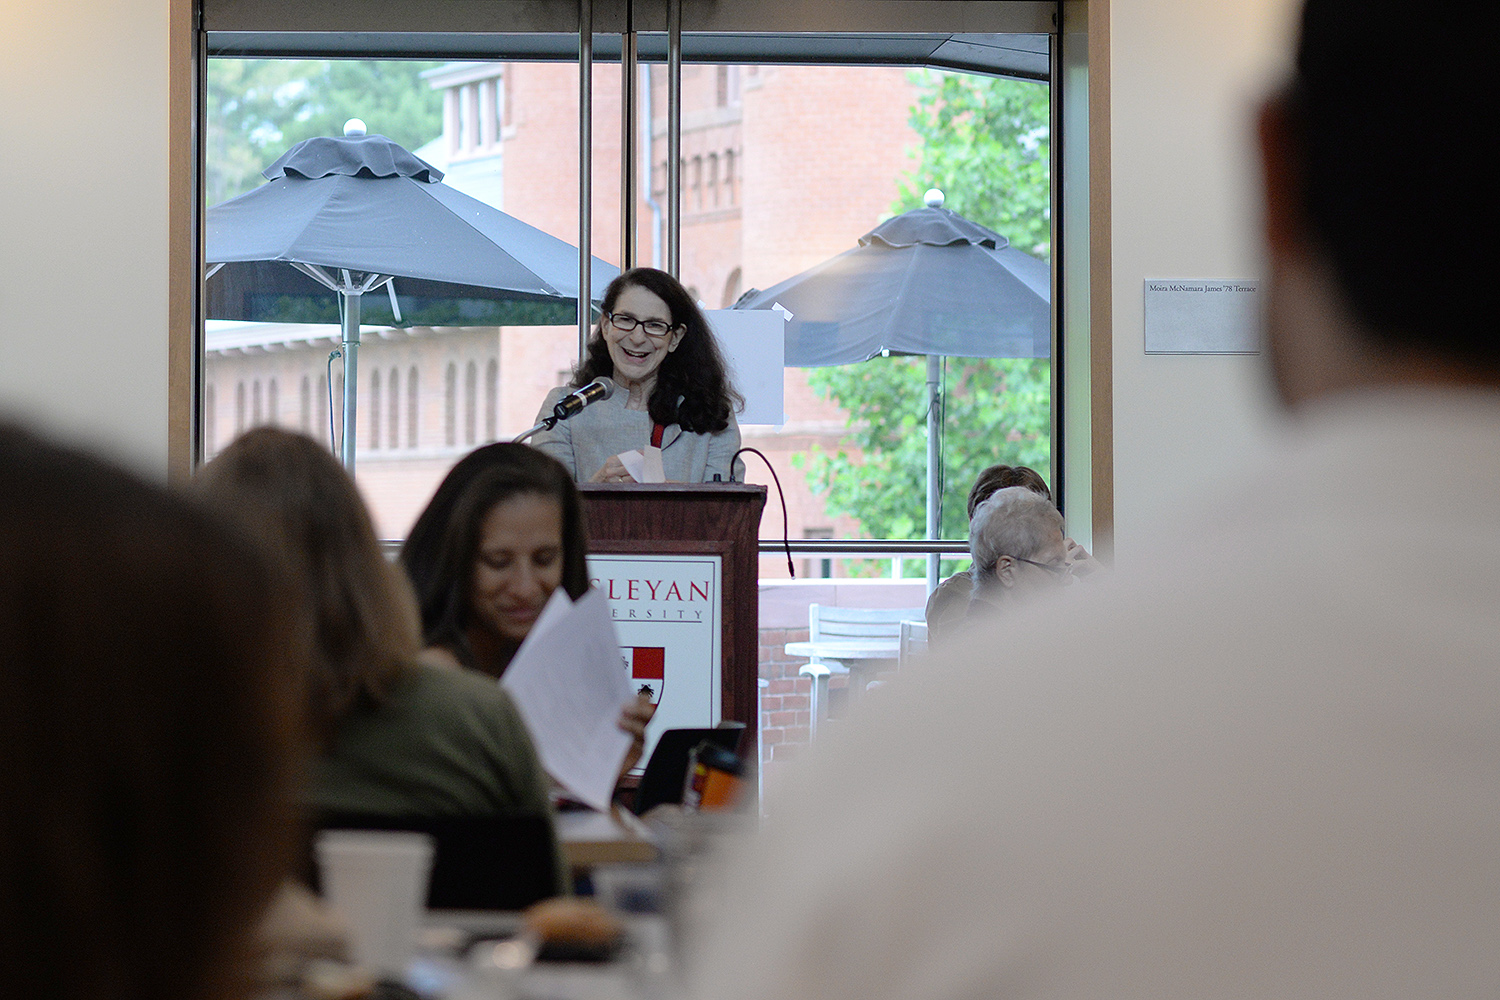 Anne Greene, director of the Wesleyan Writers Conference, welcomed the participants to the conference on June 16.